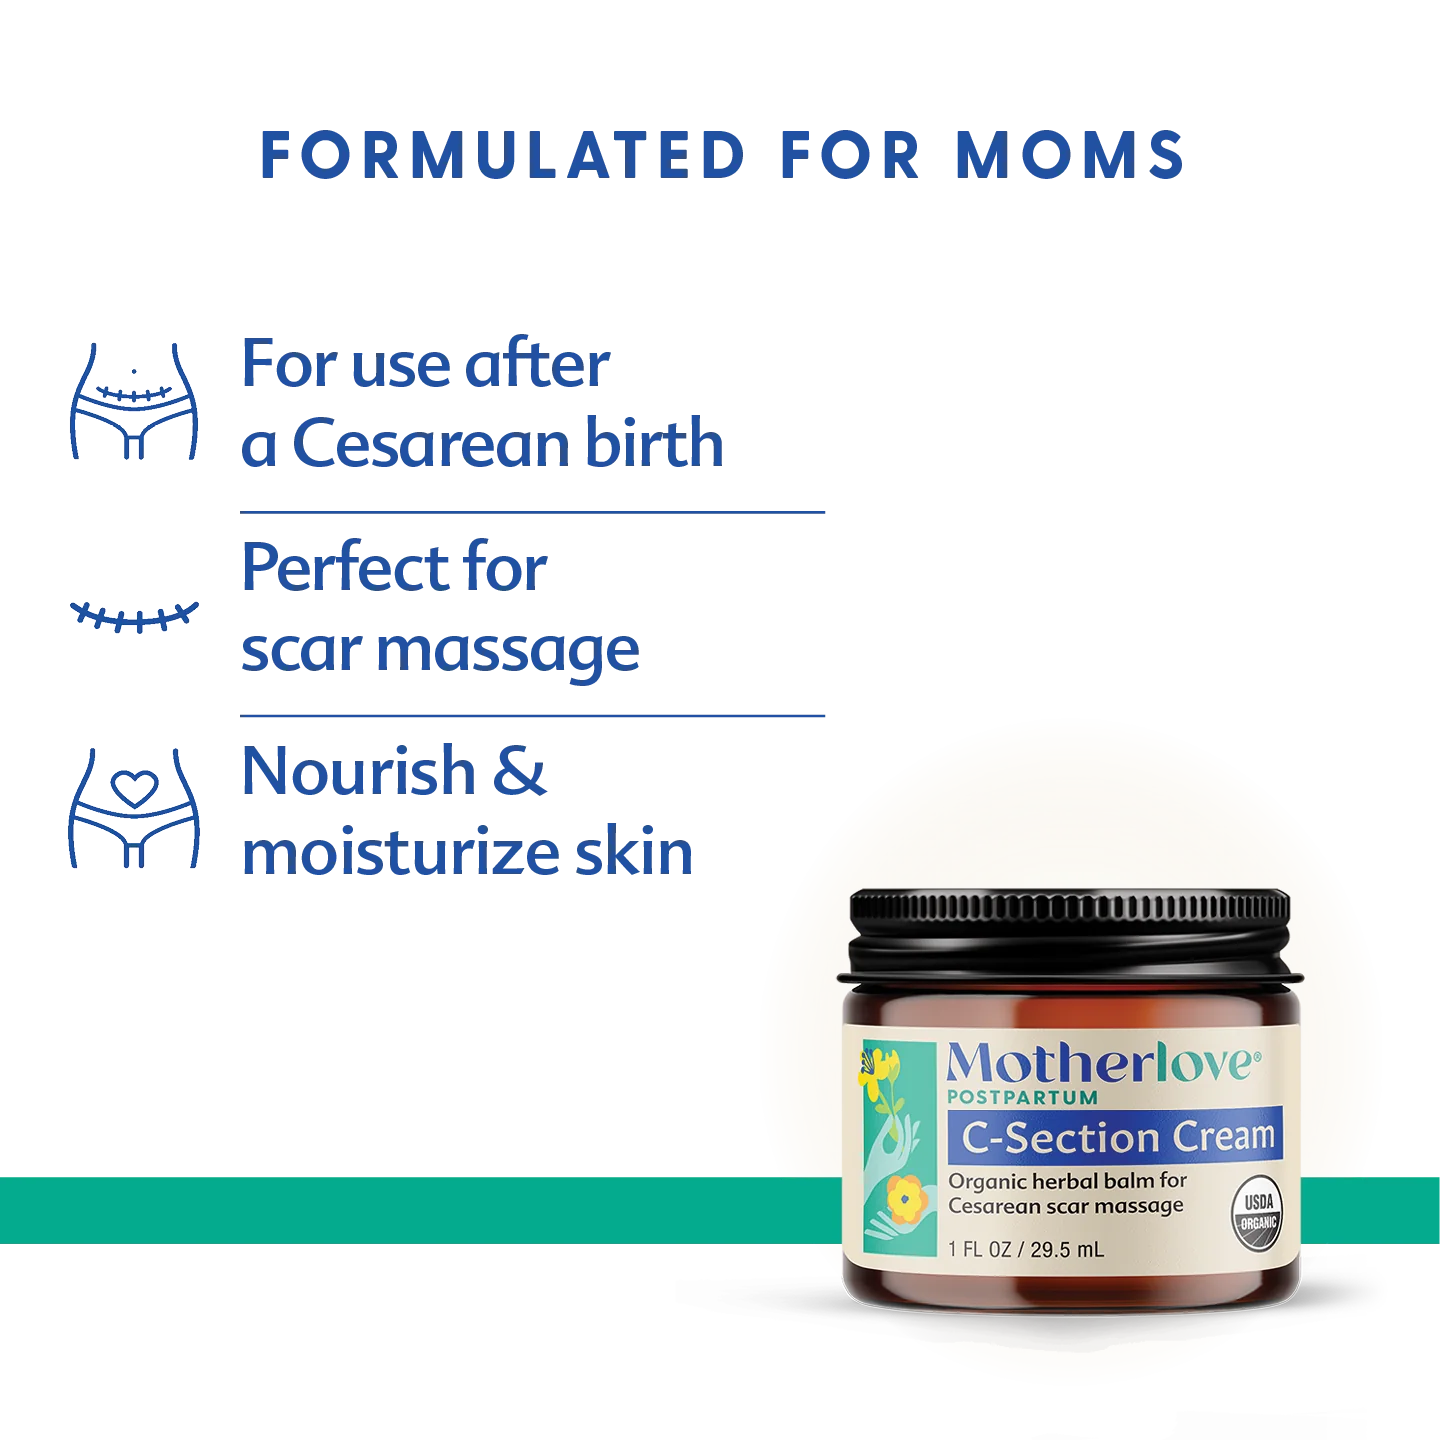 C-Section Cream by Motherlove